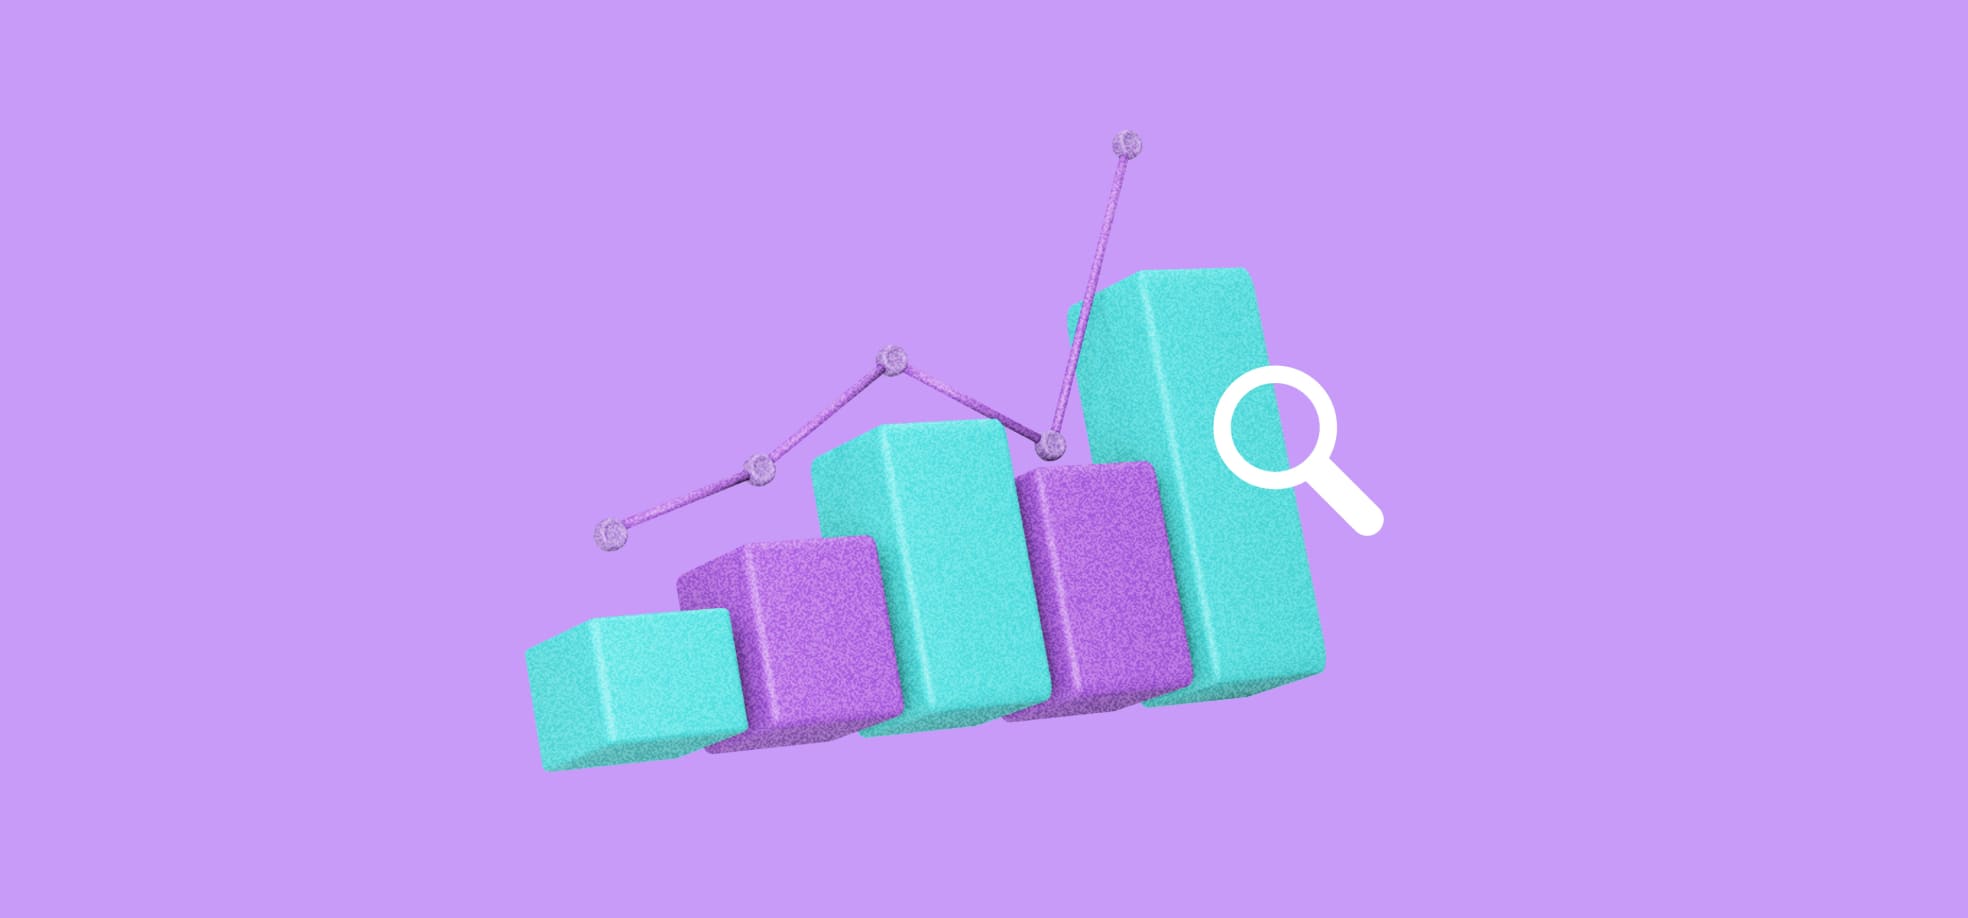 a 3D chart on a purple background illustration